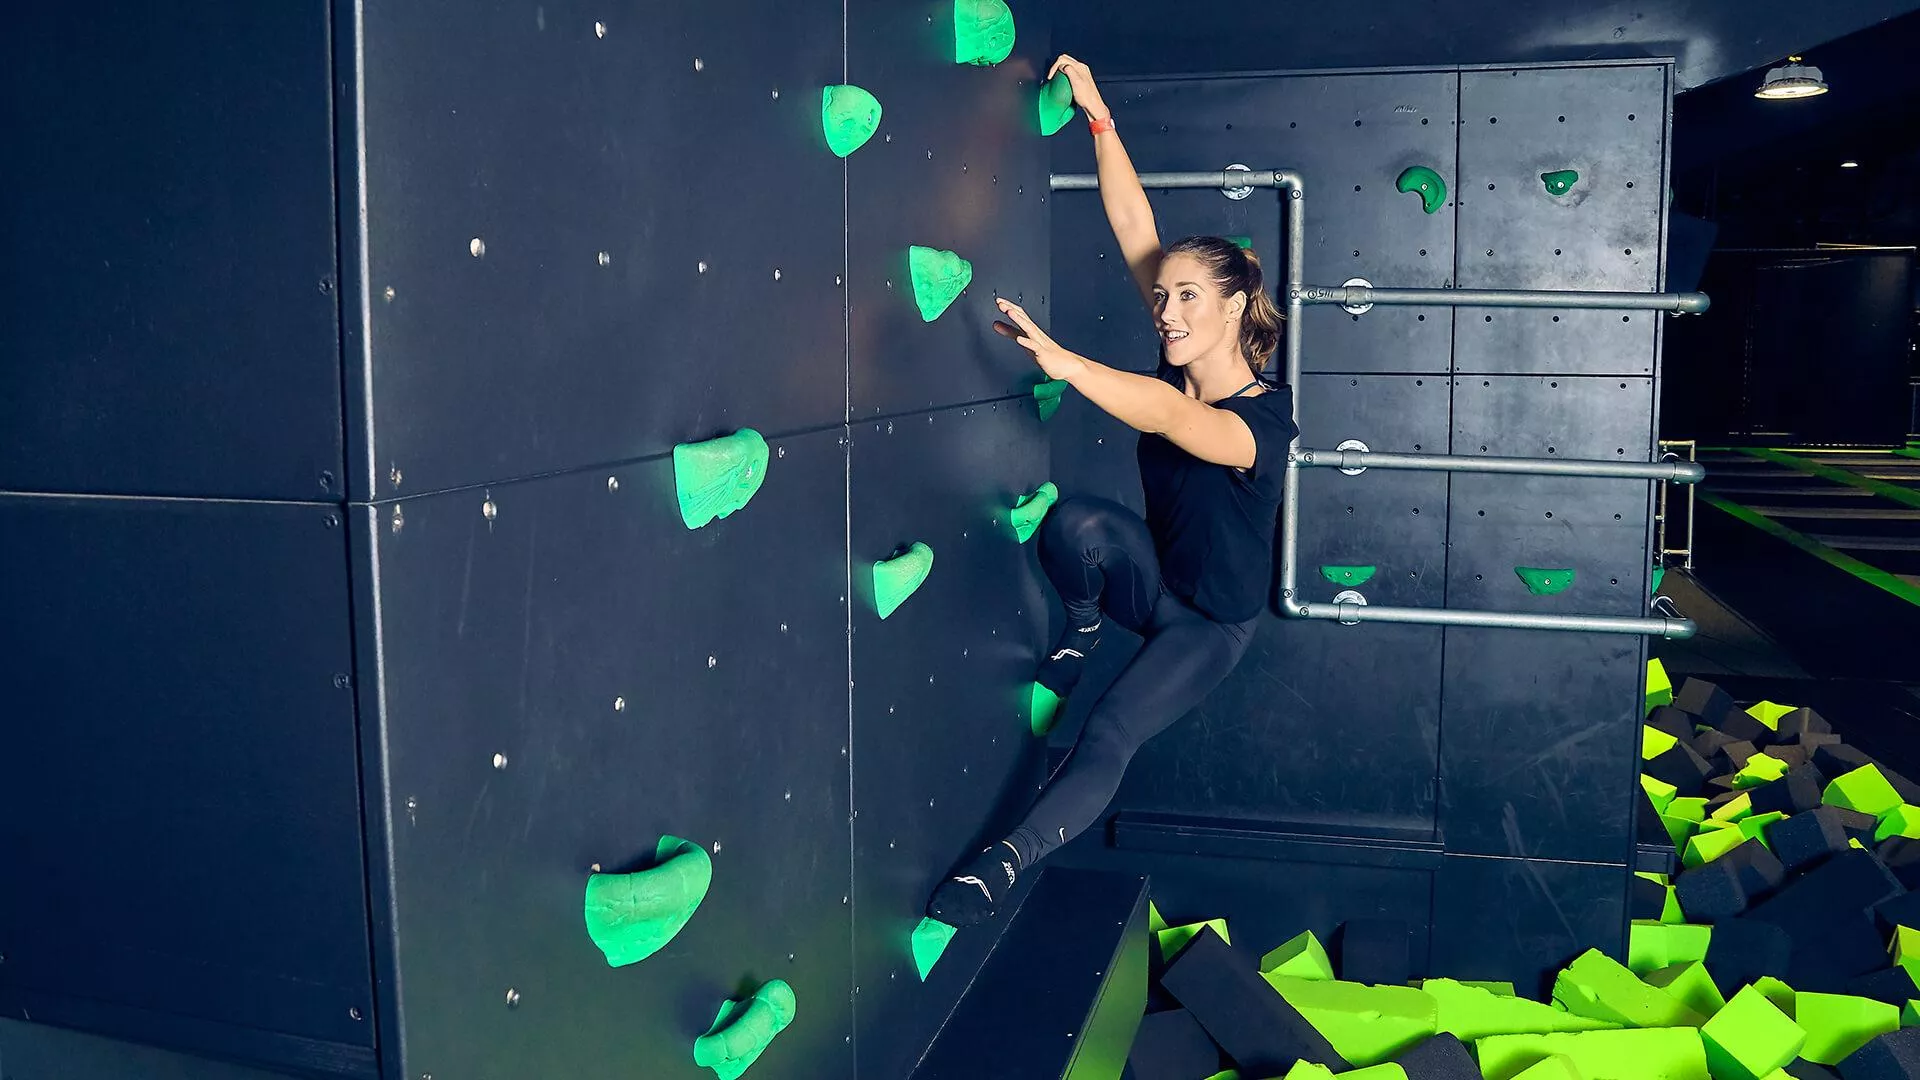  Kafle trampoline park attractions - Climbing Wall